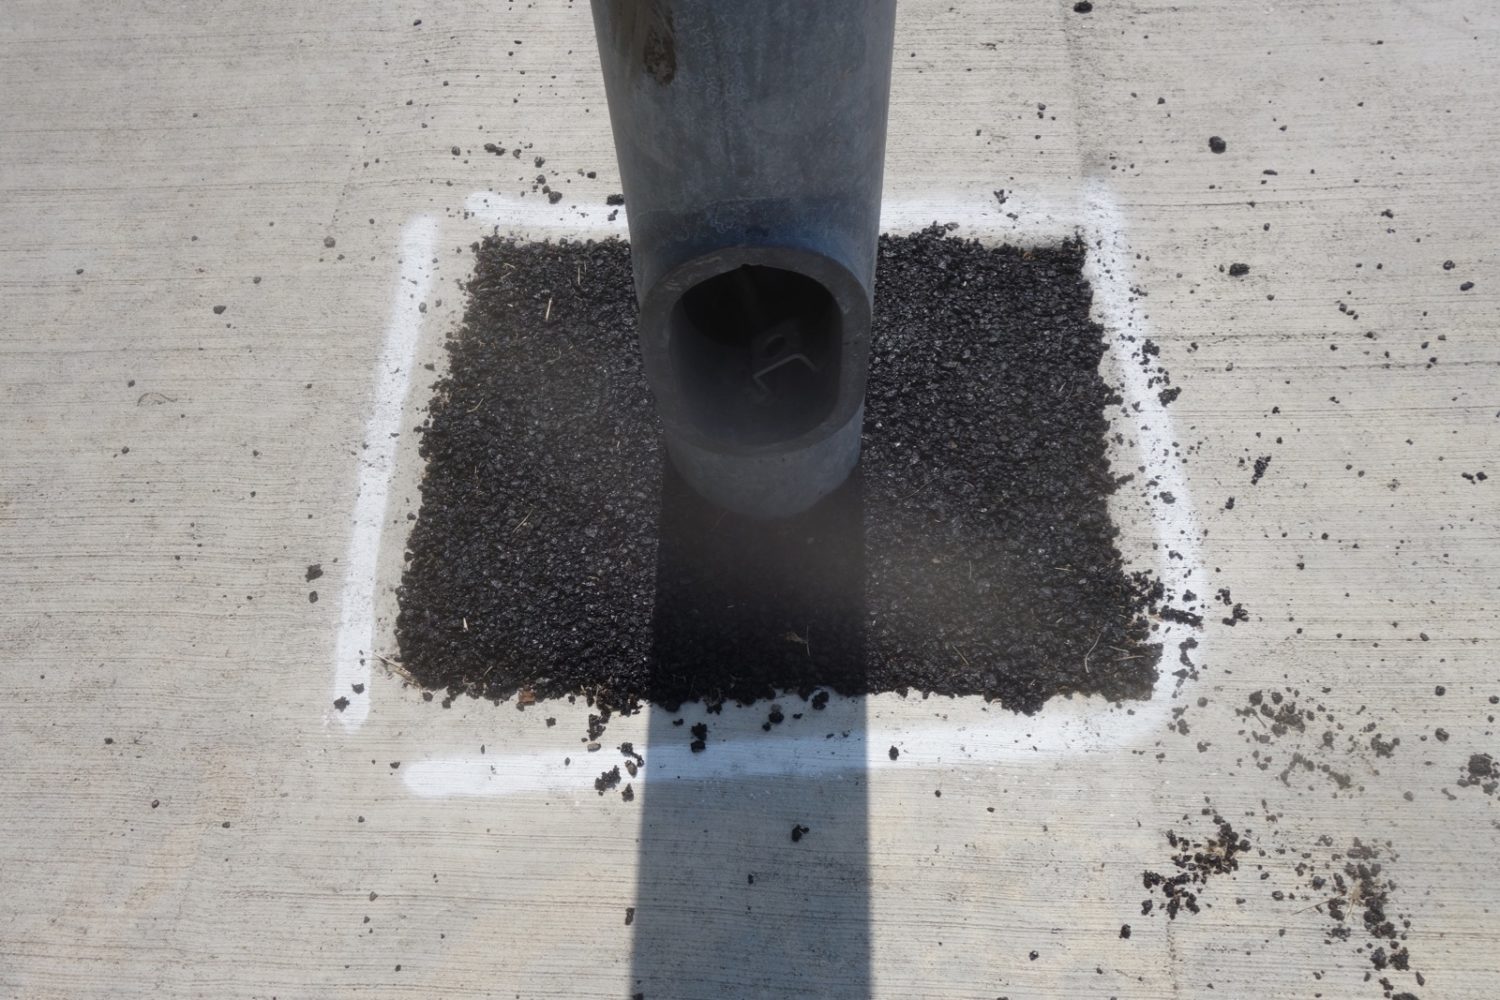 Light pole, pavement, concrete, spray paint and shadow on Mount Hope Avenue